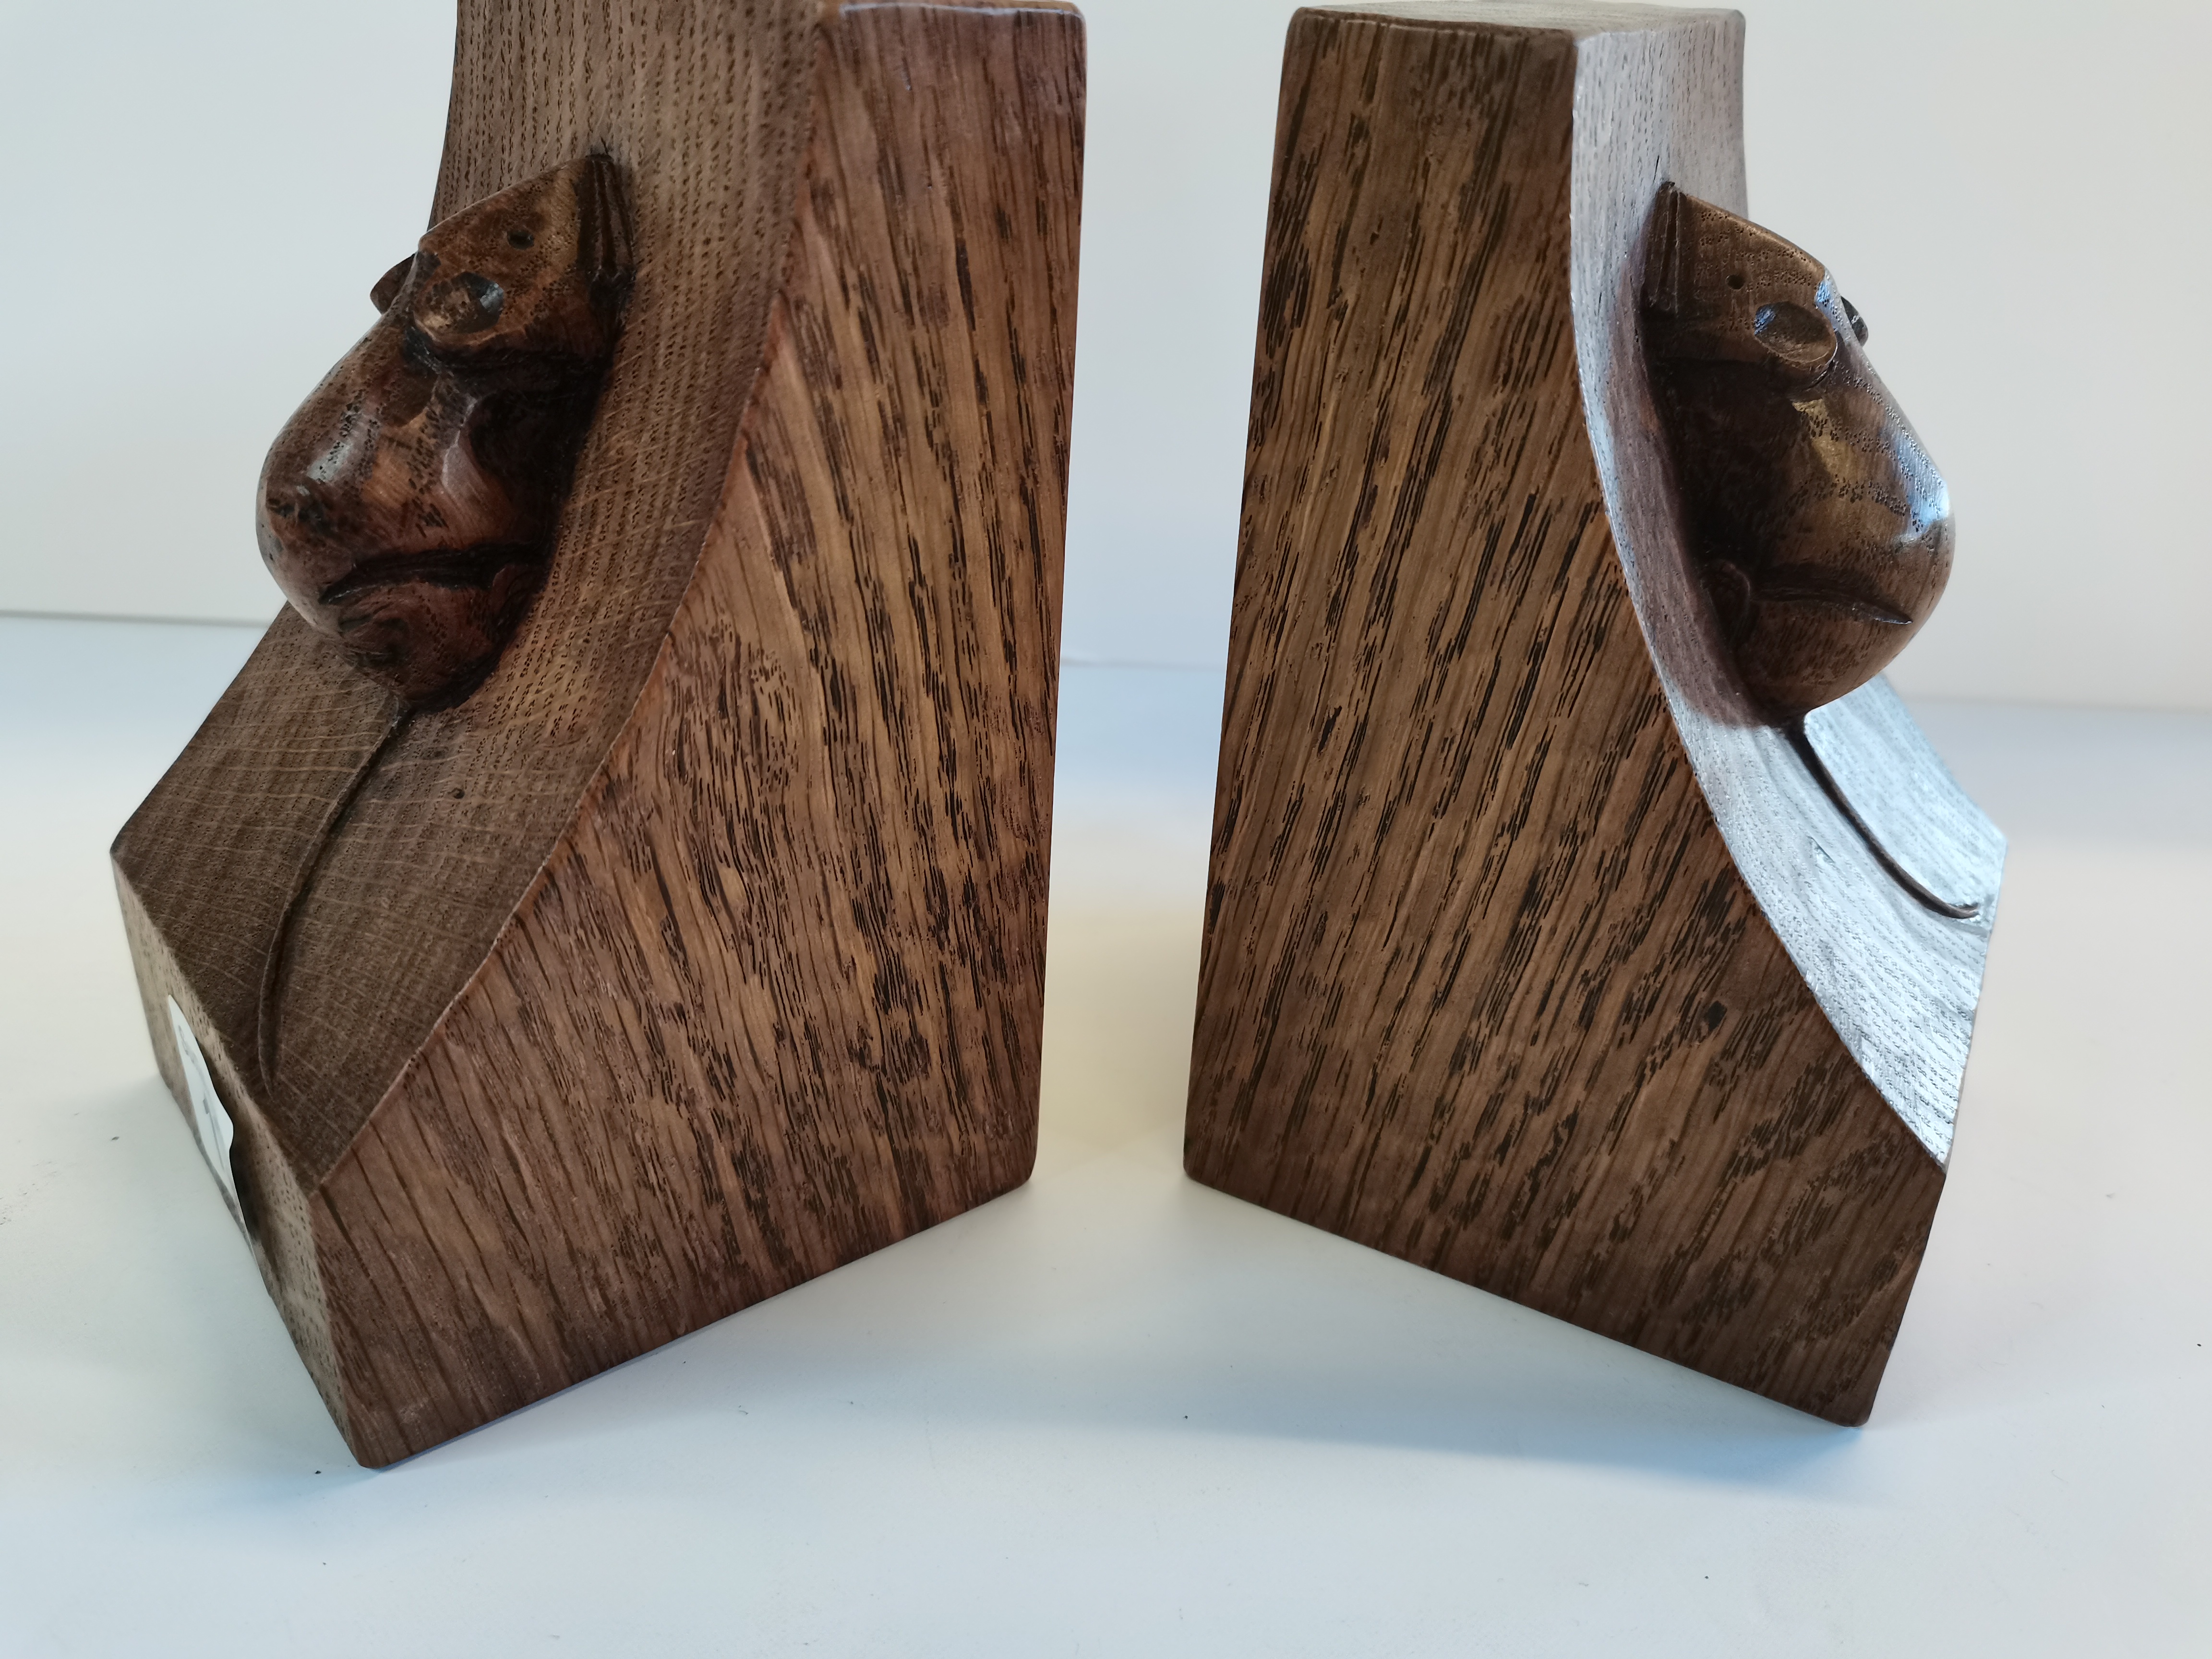 A Pair of Mouseman Bookends